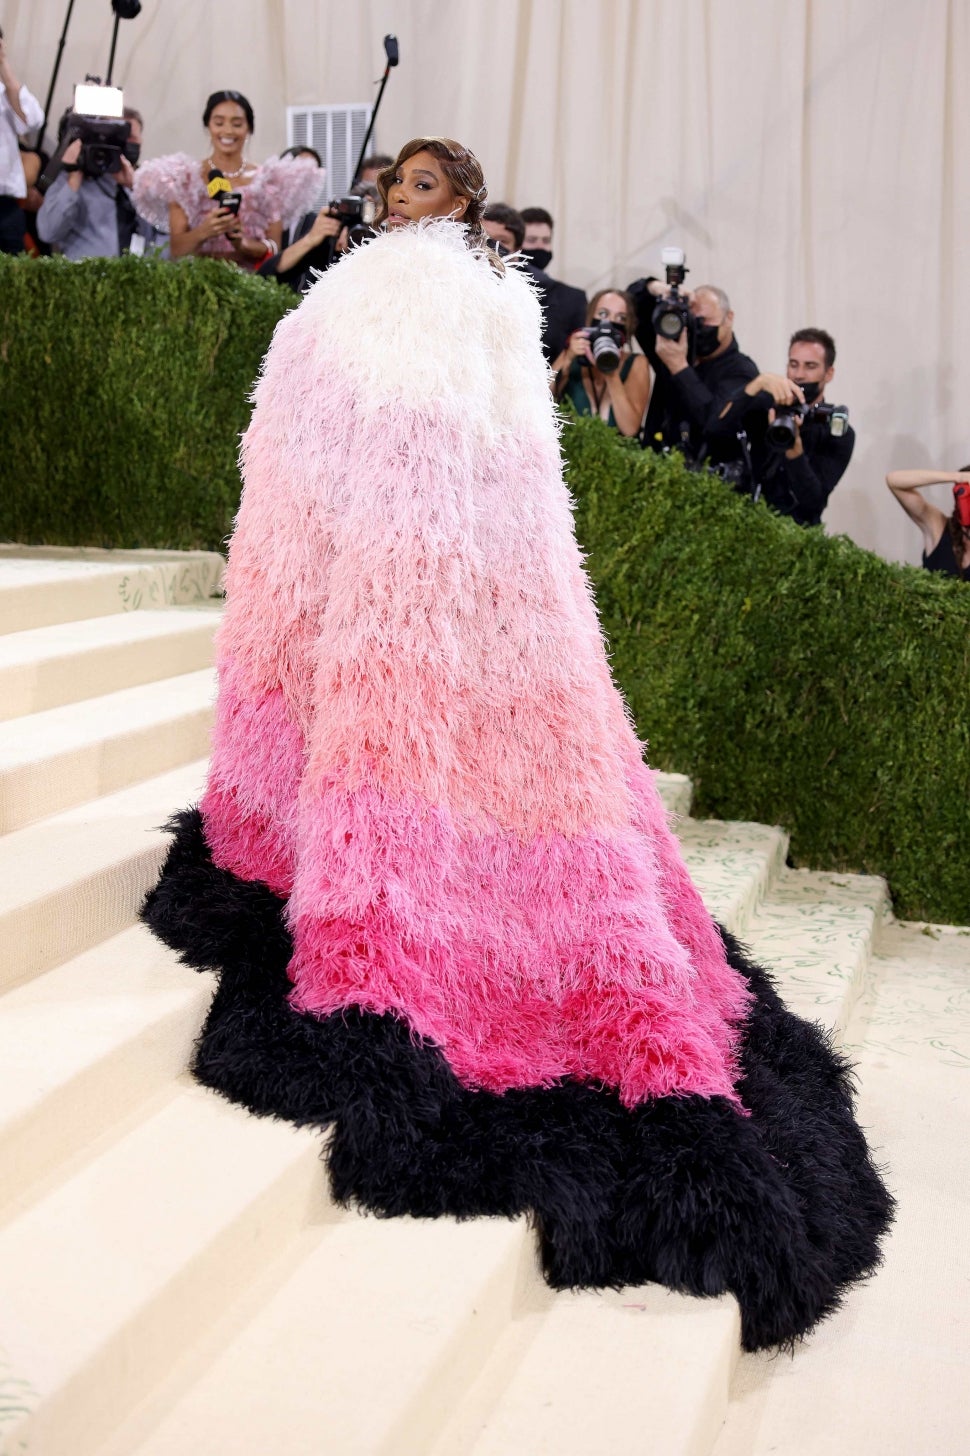  Serena Williams attends The 2021 Met Gala Celebrating In America: A Lexicon Of Fashion at Metropolitan Museum of Art on September 13, 2021 in New York City.